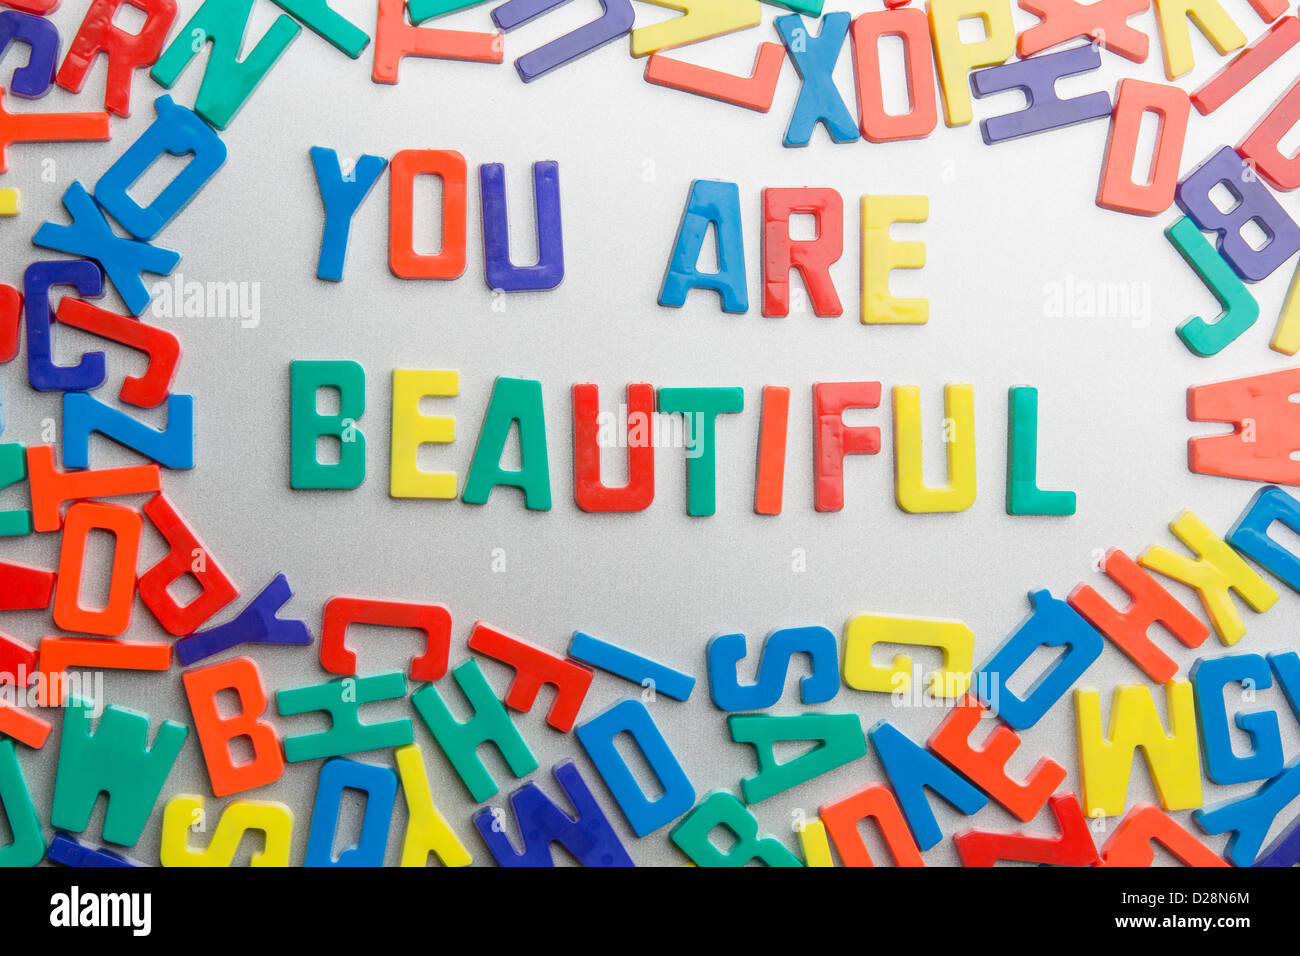 'You Are Beautiful' - Refrigerator magnets spell a message out of a jumble of letters Stock Photo